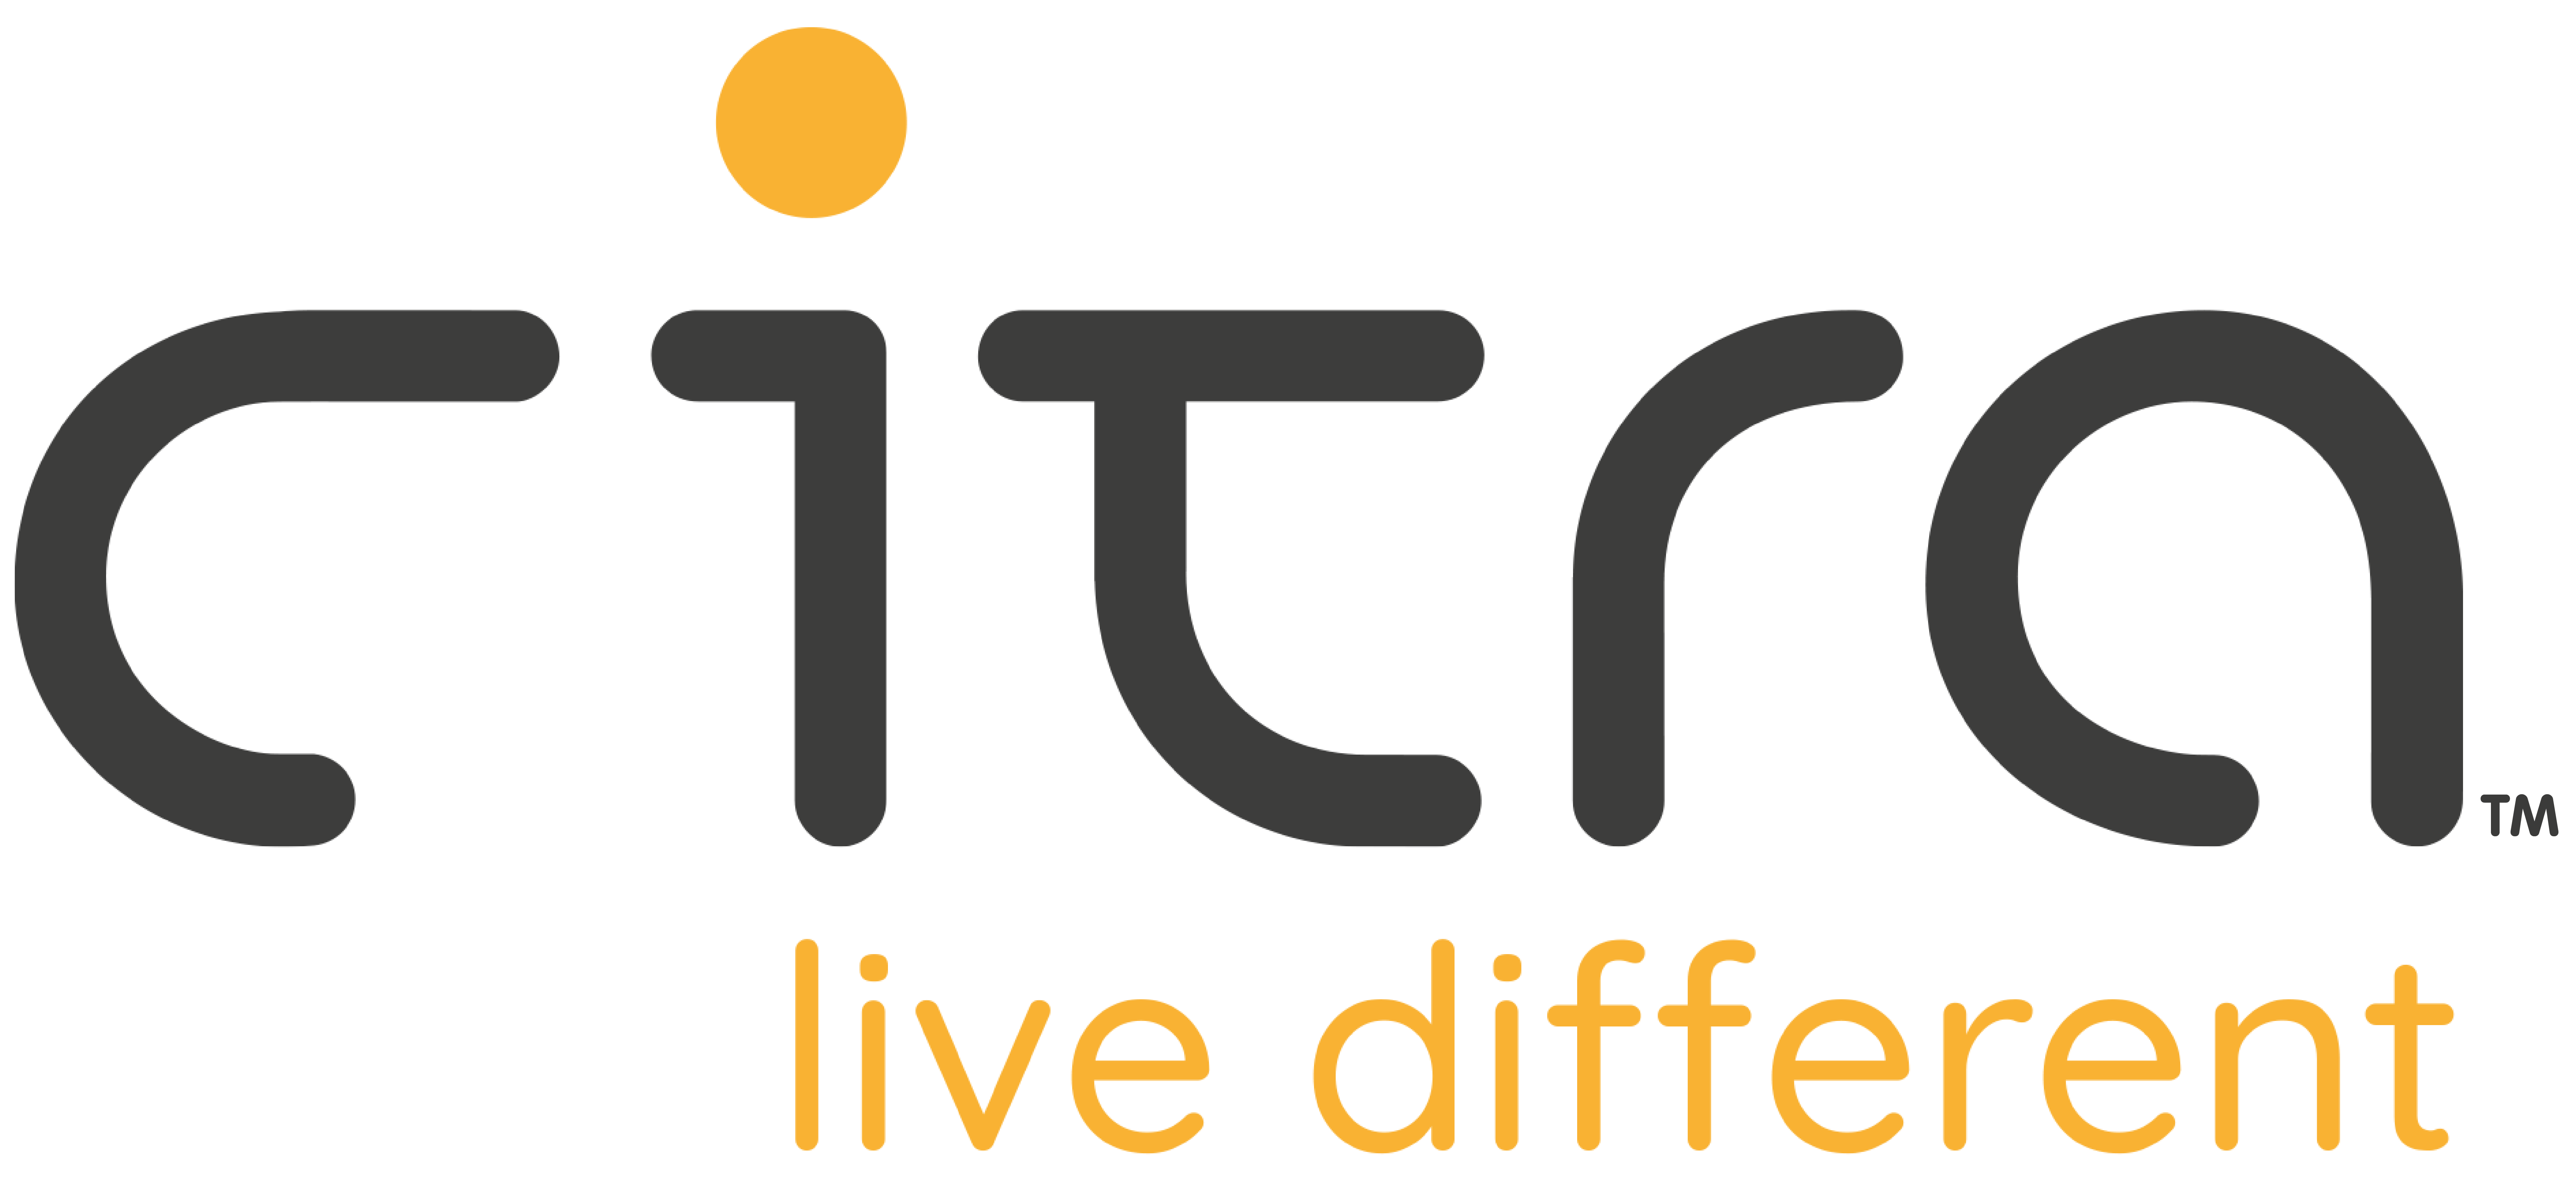 Citra - live different